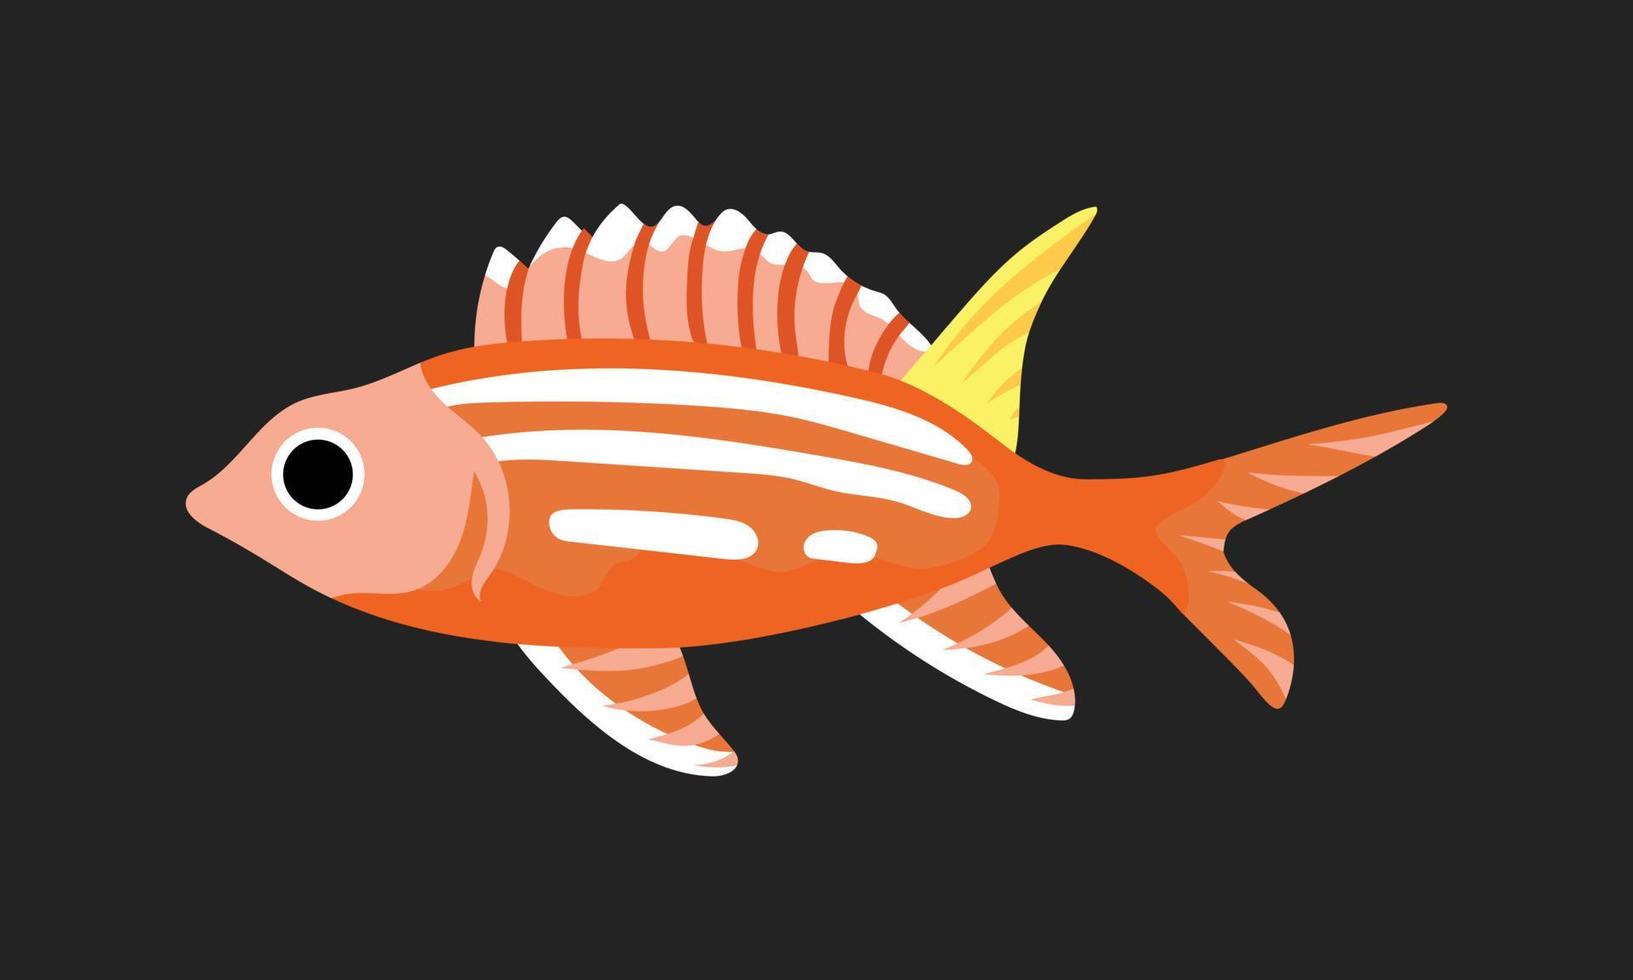 orange longspine squirrelfish. collection set of coral fish illustration. the hand drawing of under the sea life. hand drawn vector animation. adorable and beautiful fishes of marine life.